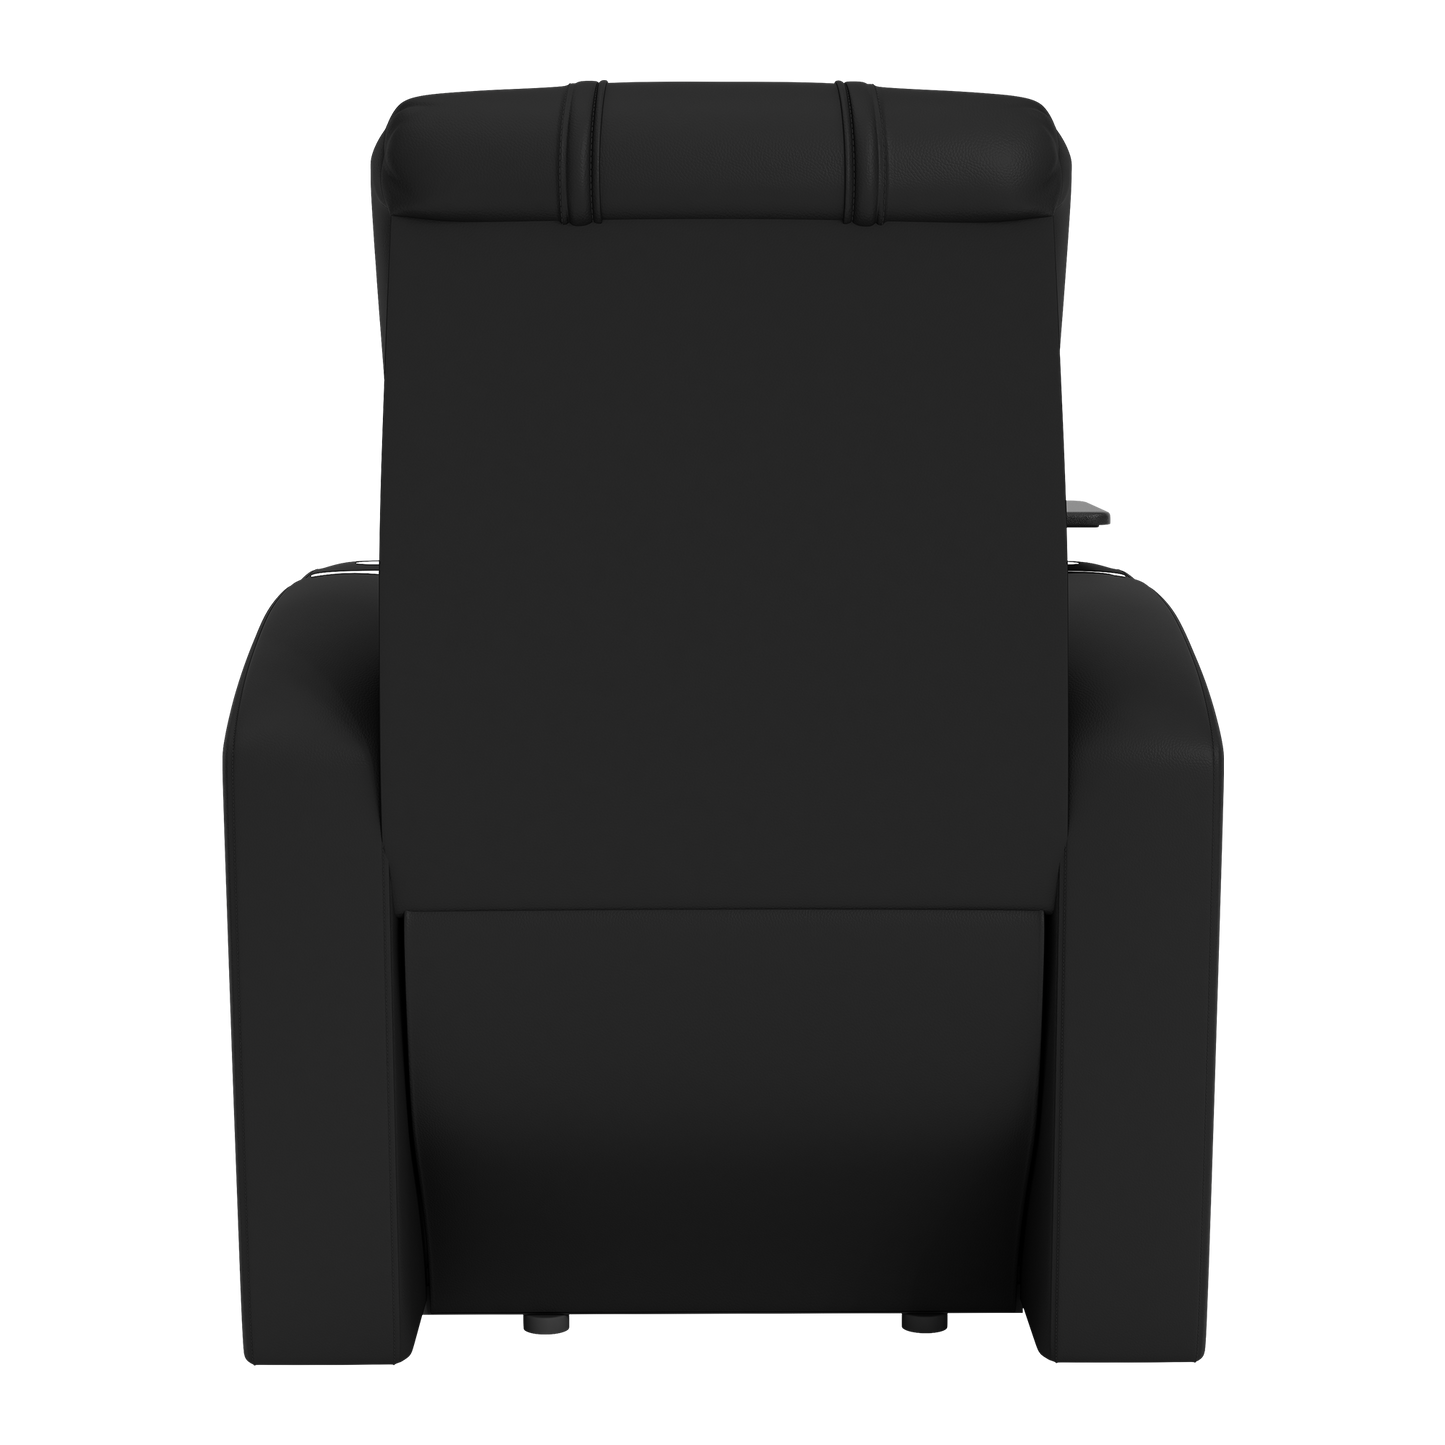 Stealth Power Plus Recliner with Virginia Cavaliers Primary Logo